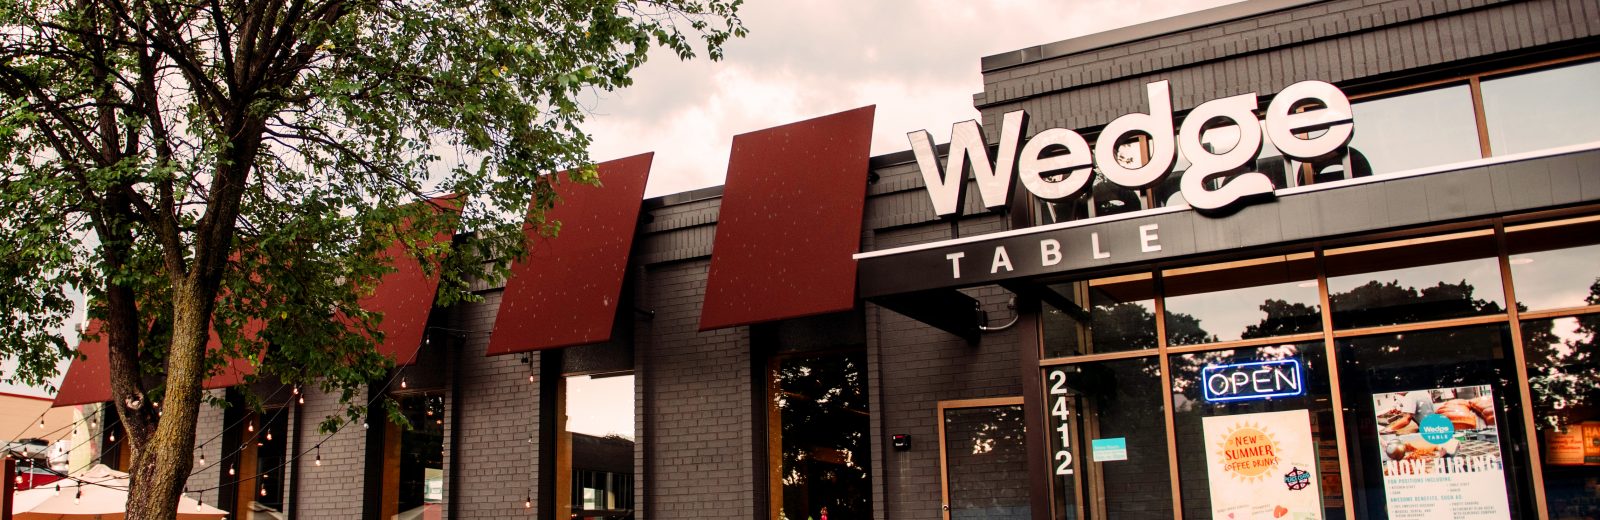 The exterior of The Wedge Table with a large white letters spelling out Wedge and the word table smaller underneath. The new-construction-style modern building has black/gray fixtures and large panel glass windows